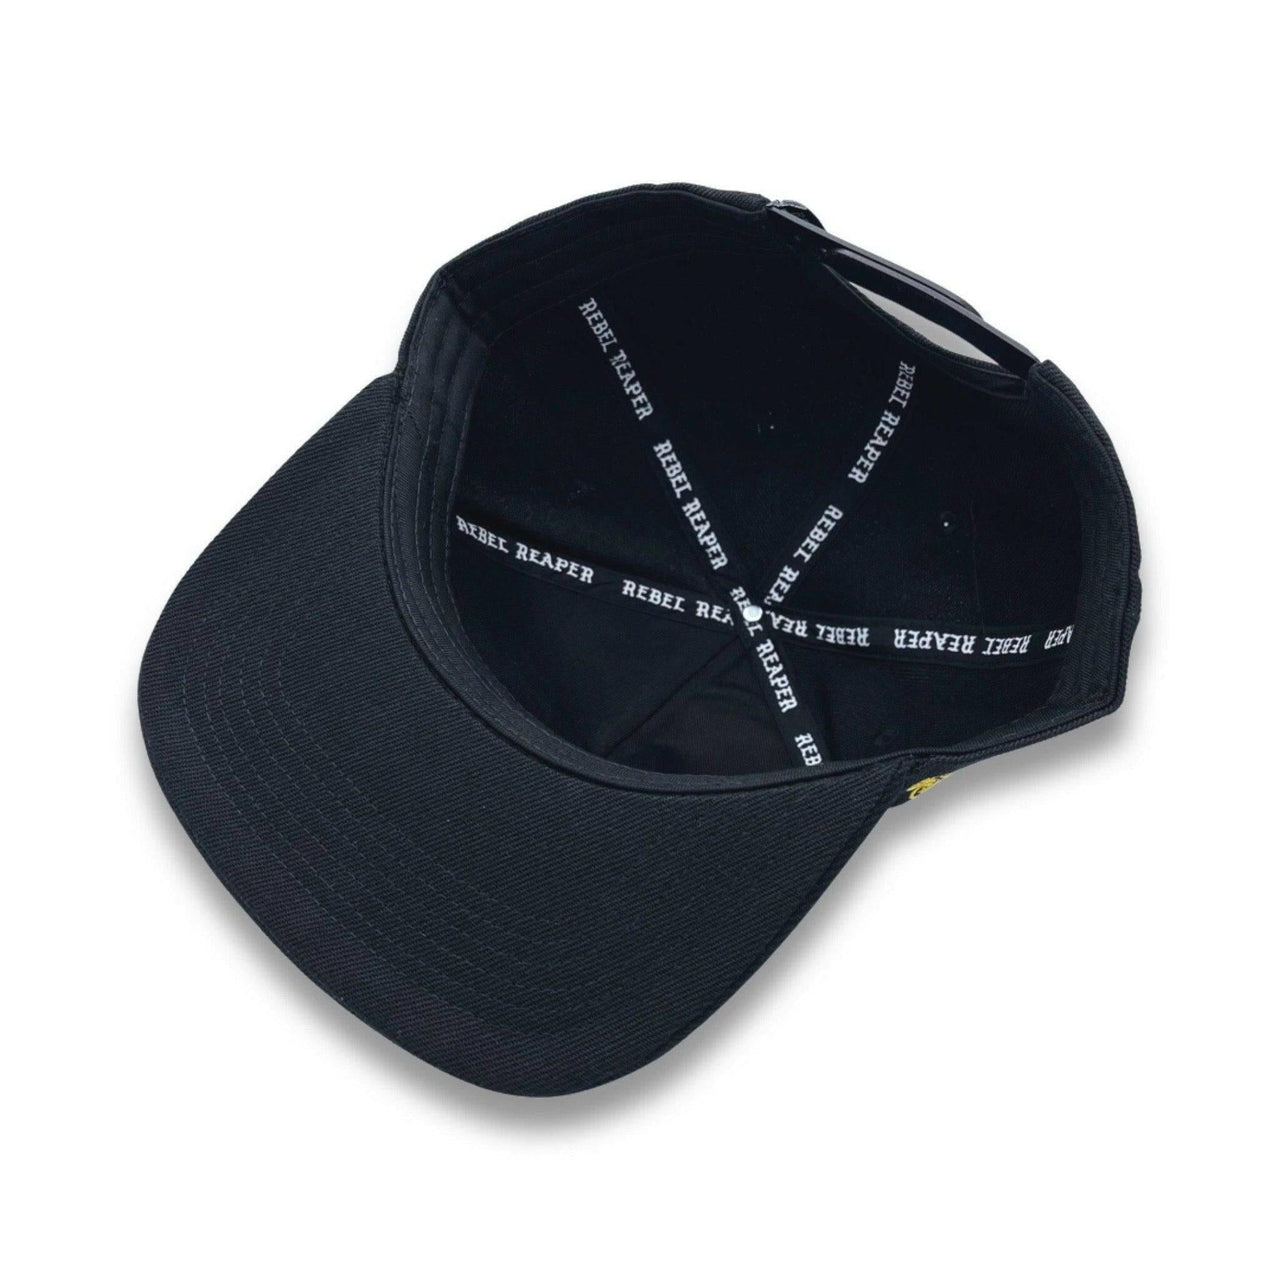 Black Quality Goods Embroidered Snapback - Rebel Reaper Clothing Company Hats - Snapback